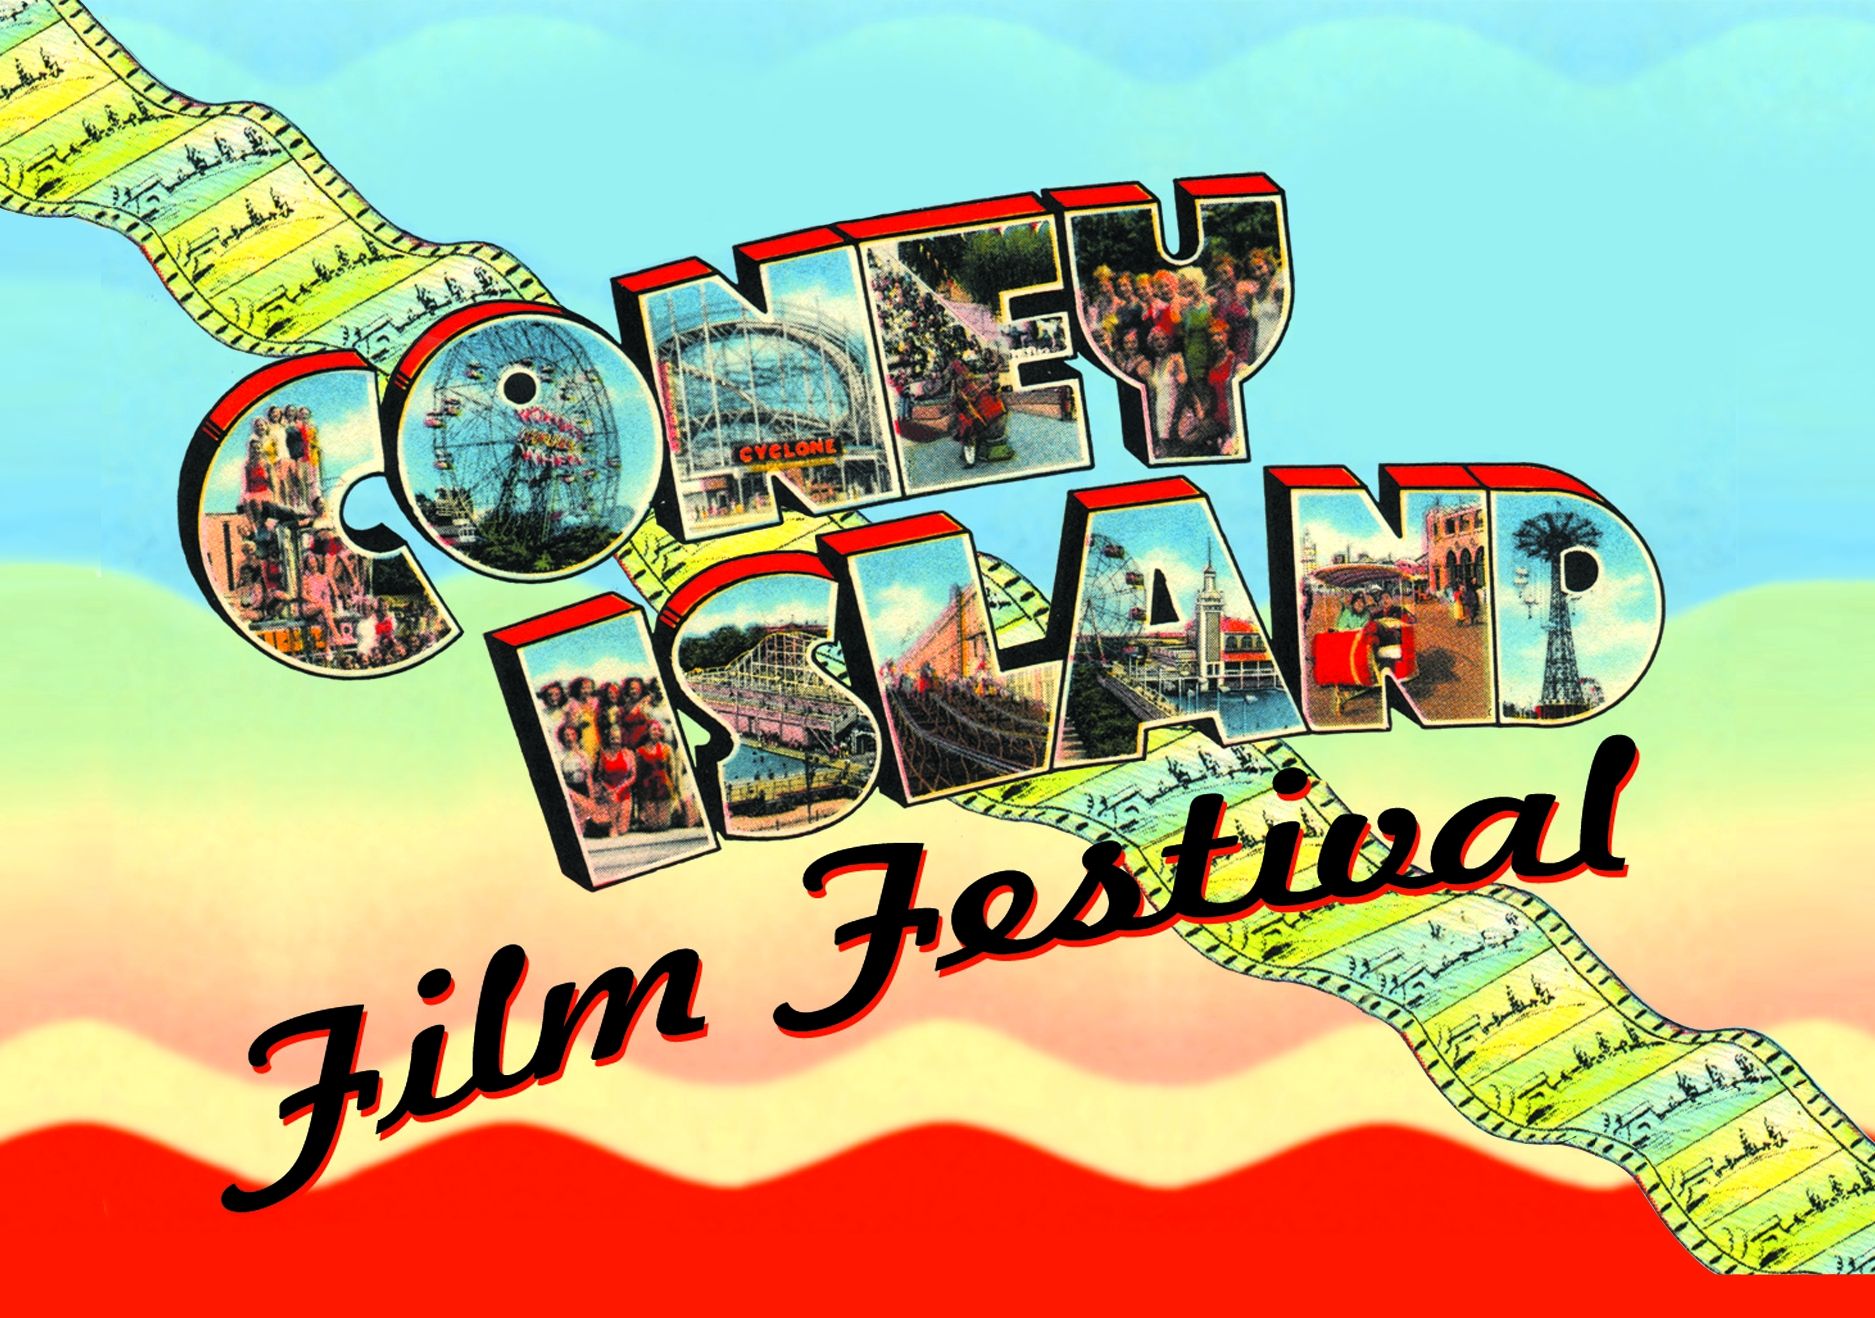 19th Annual Coney Island Film Festival: Animation, Horror Shorts, ‘The Warriors’ & More